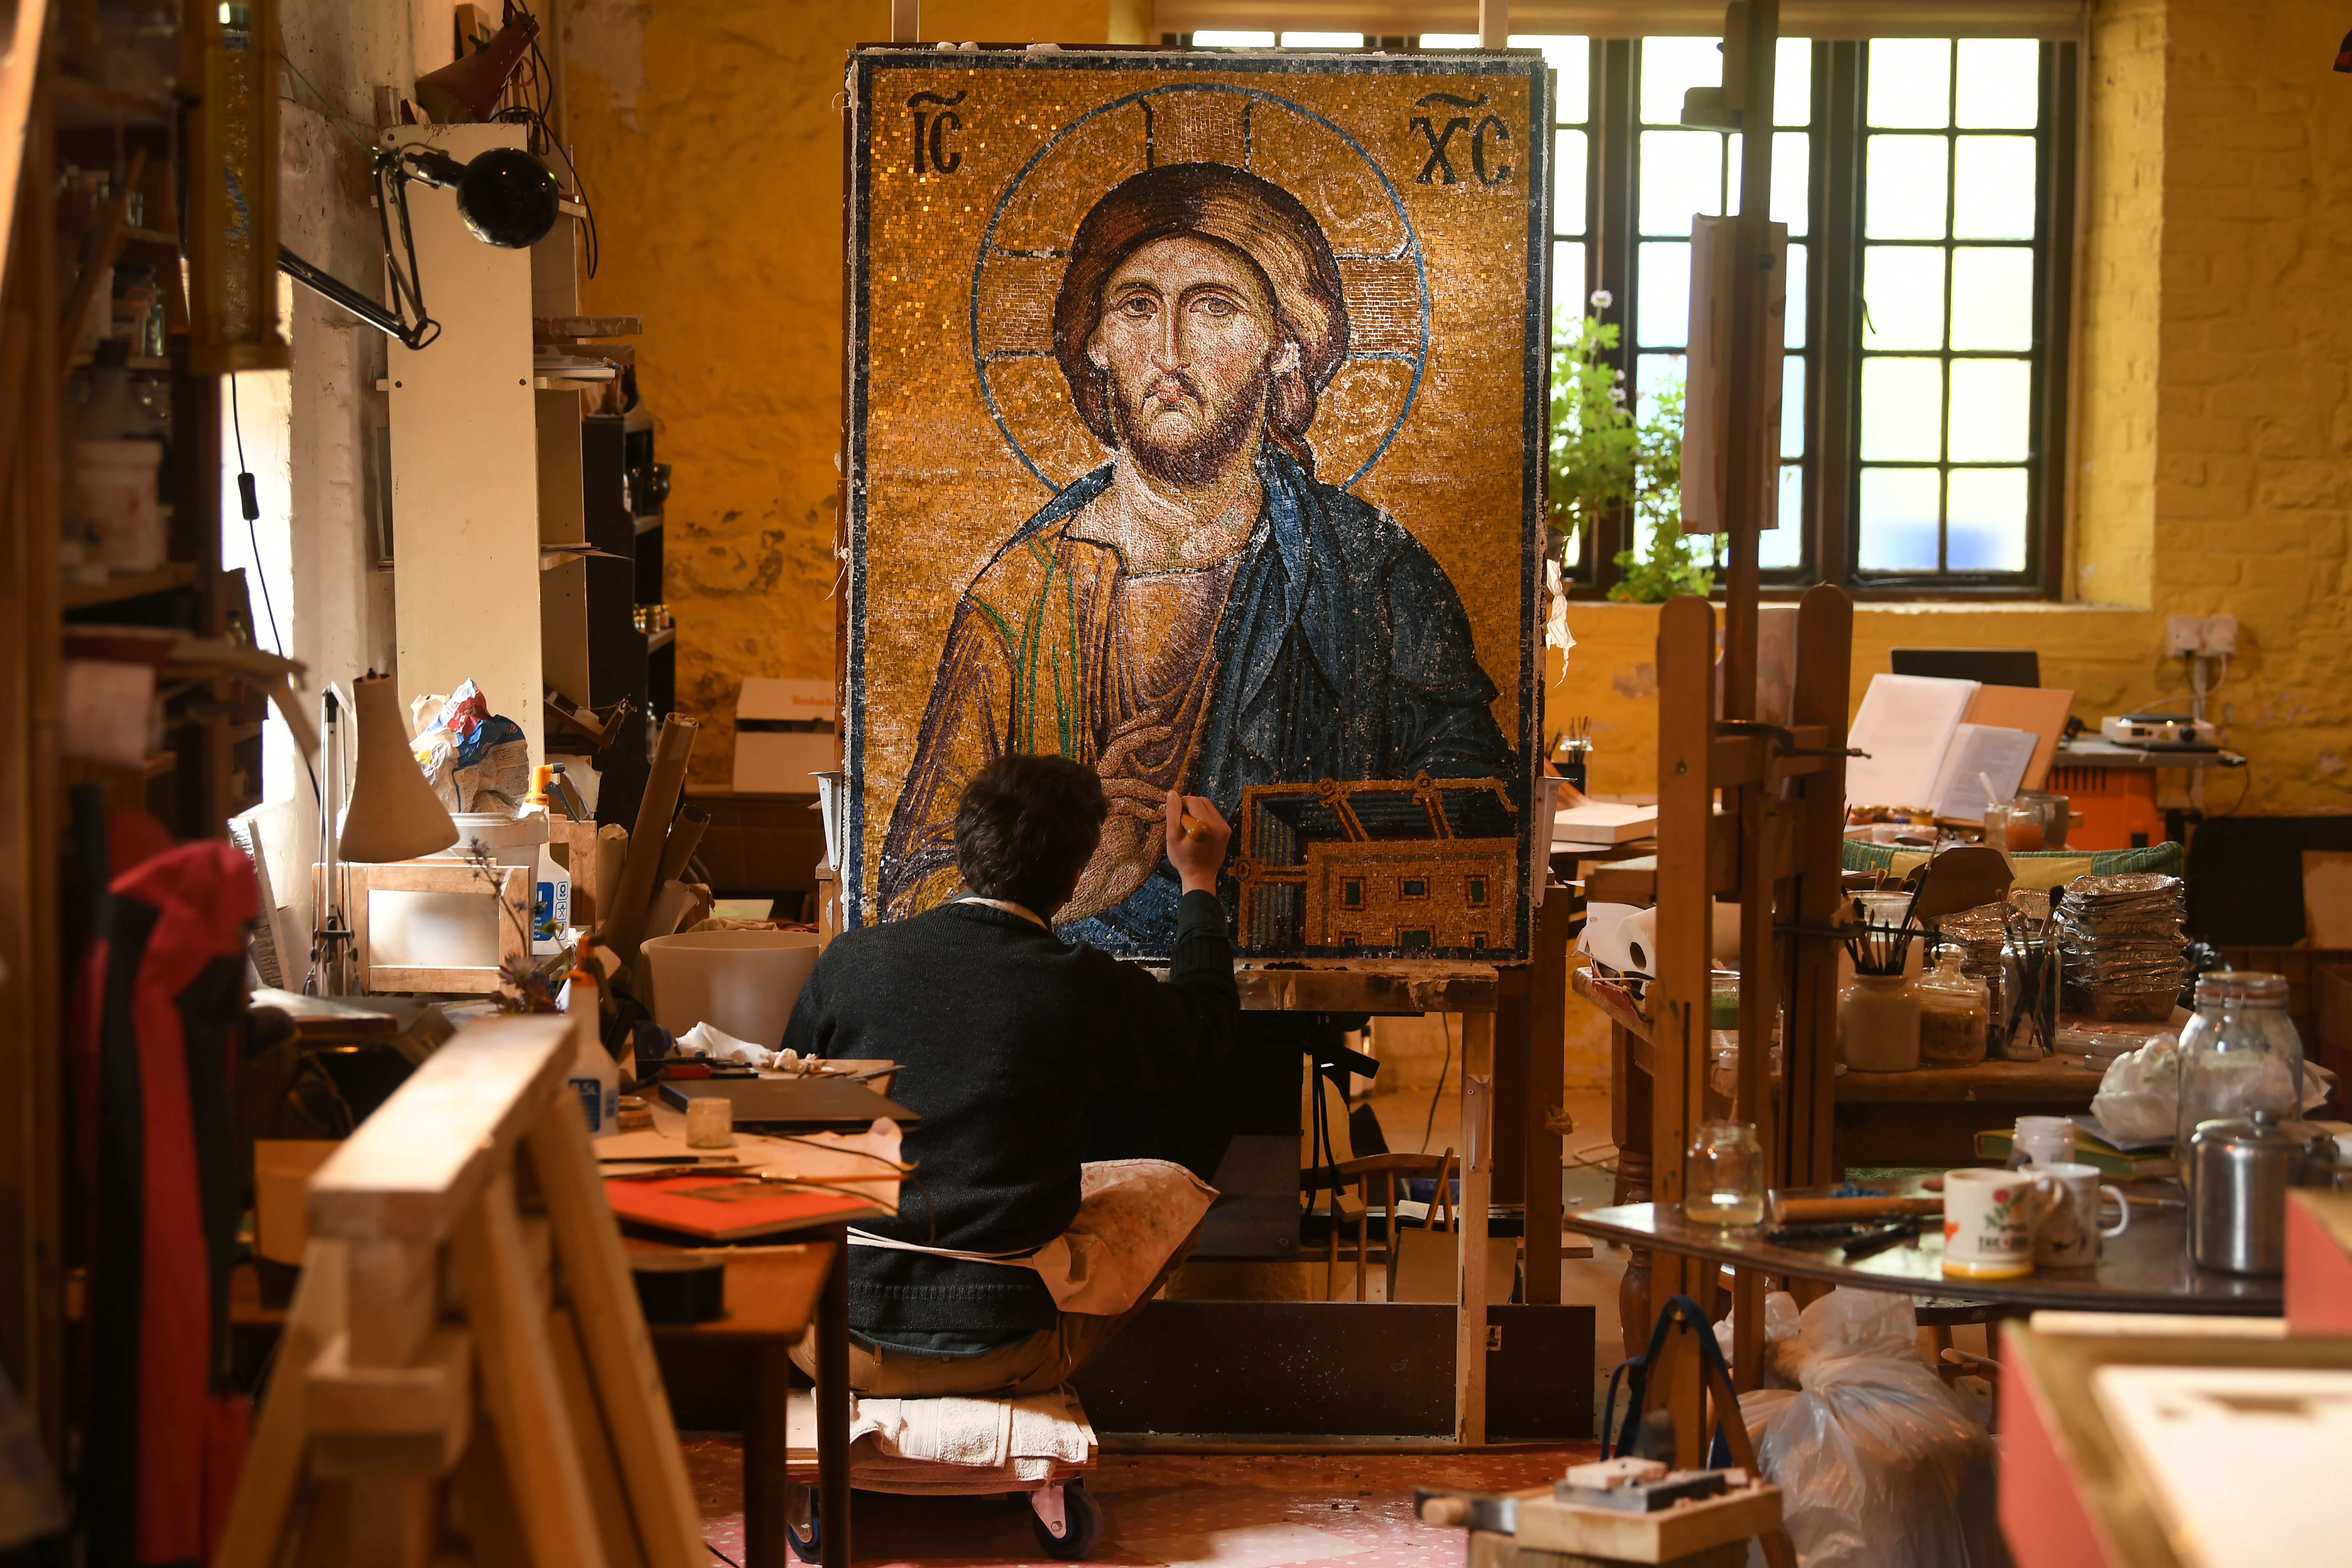 A man with brown hair sits in front of a painted icon